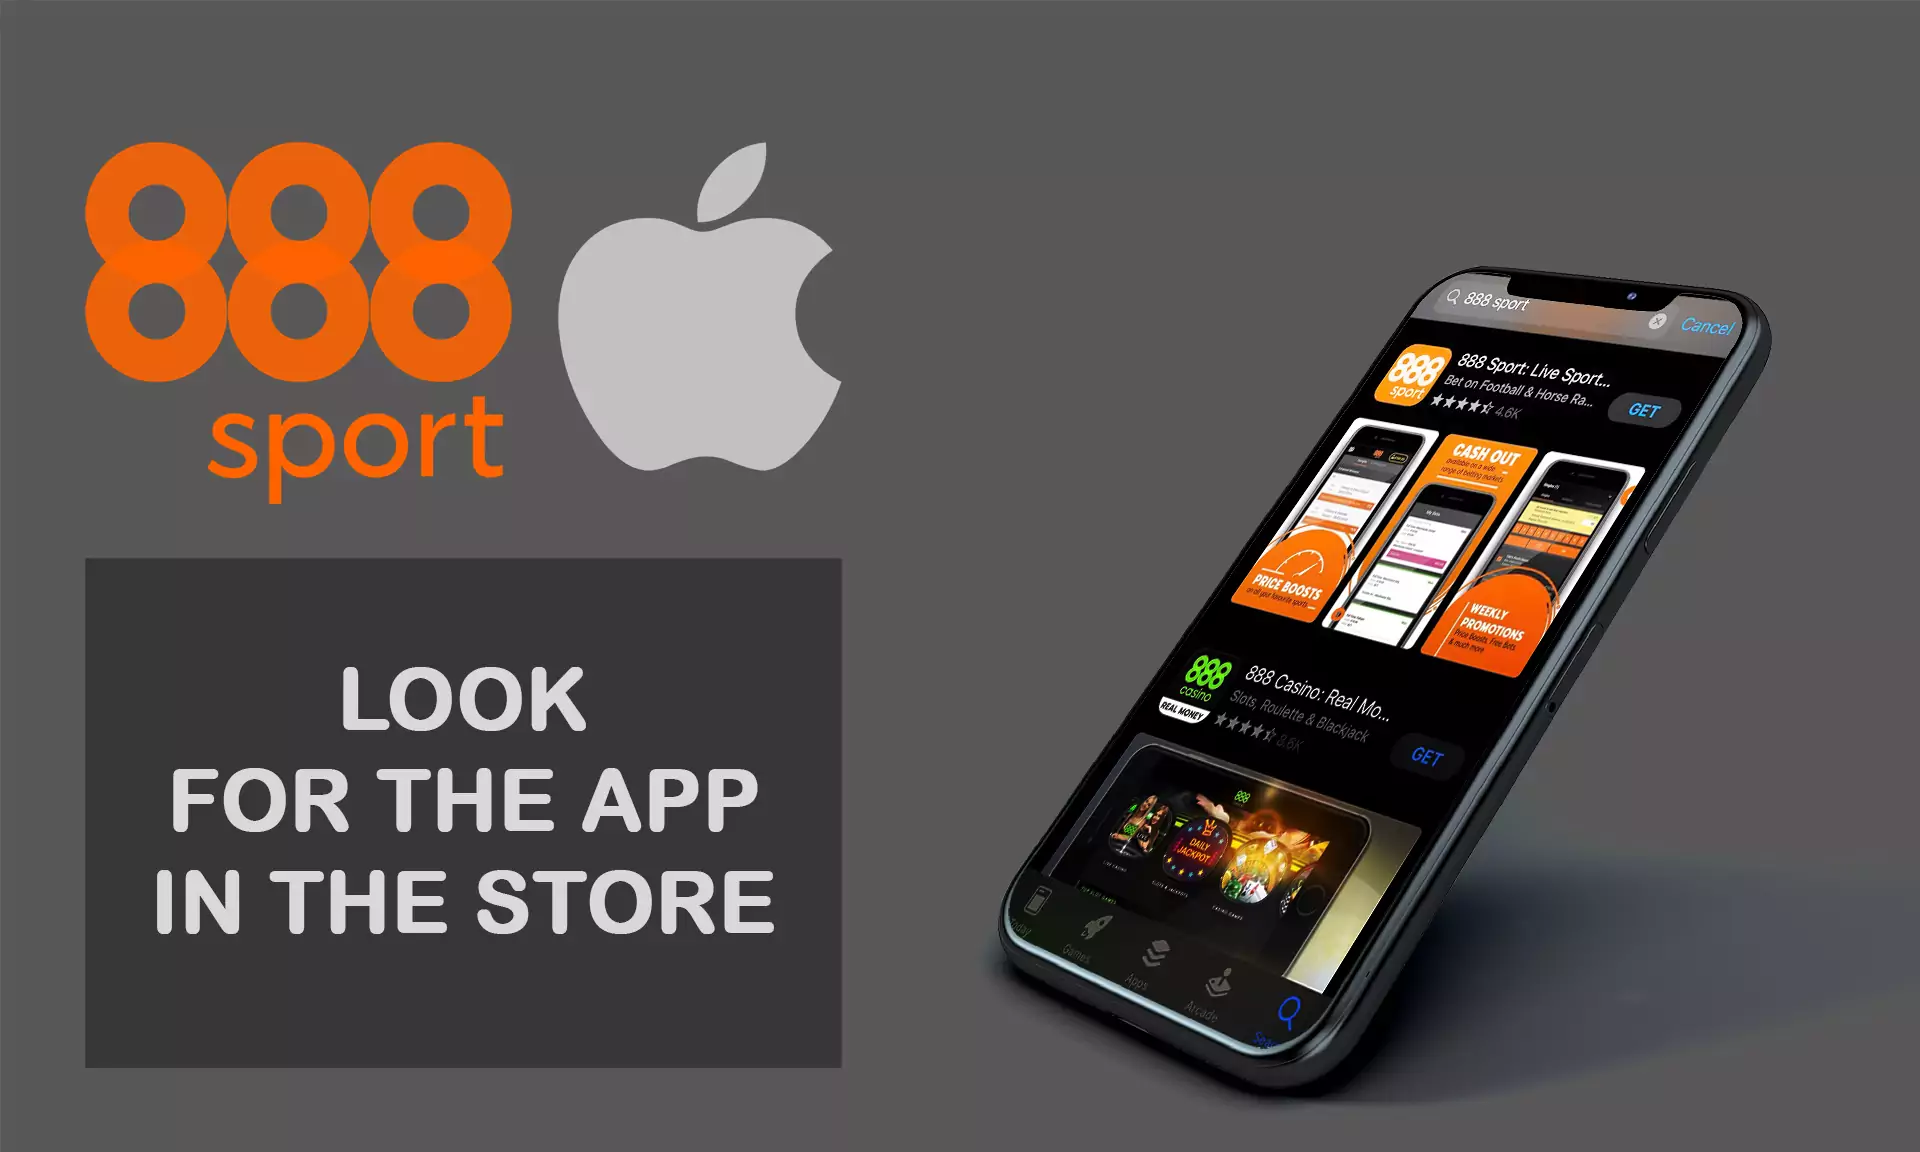 Look for the 888sport betting app in AppStore.